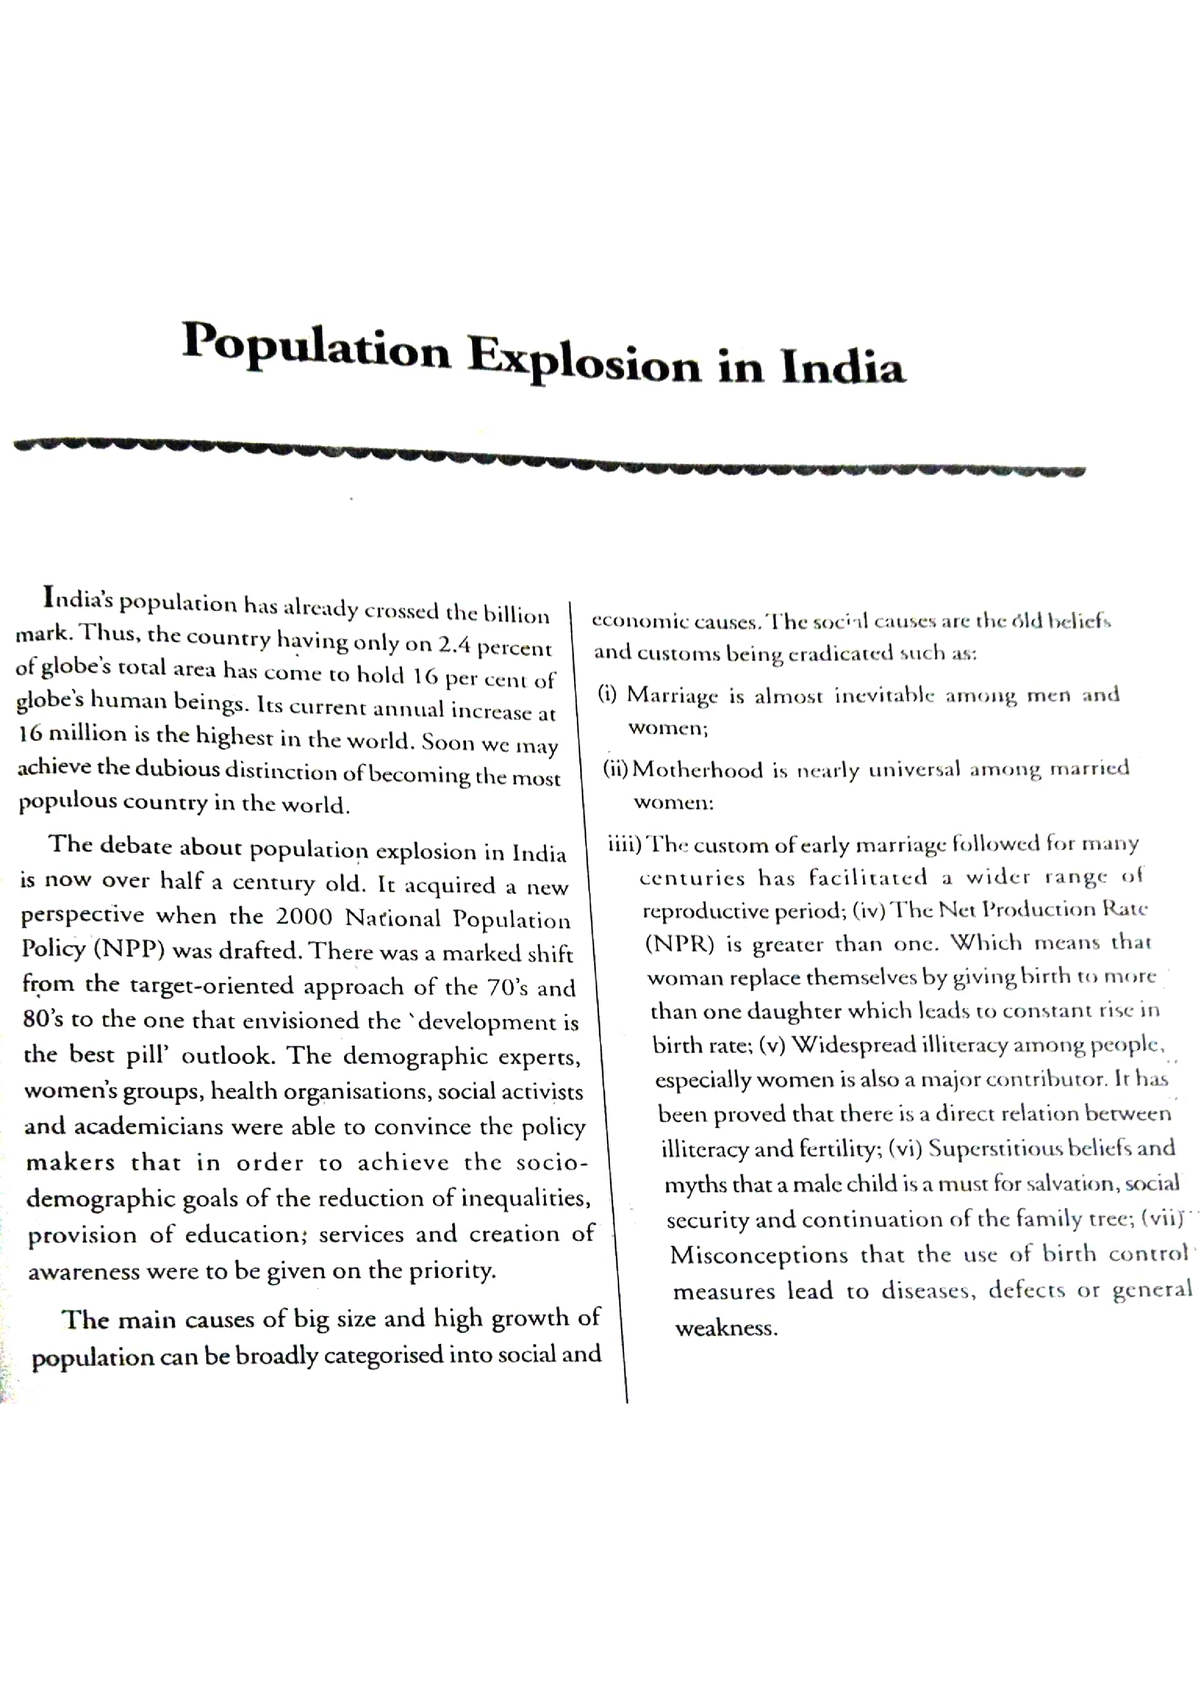 write an essay on population explosion in india